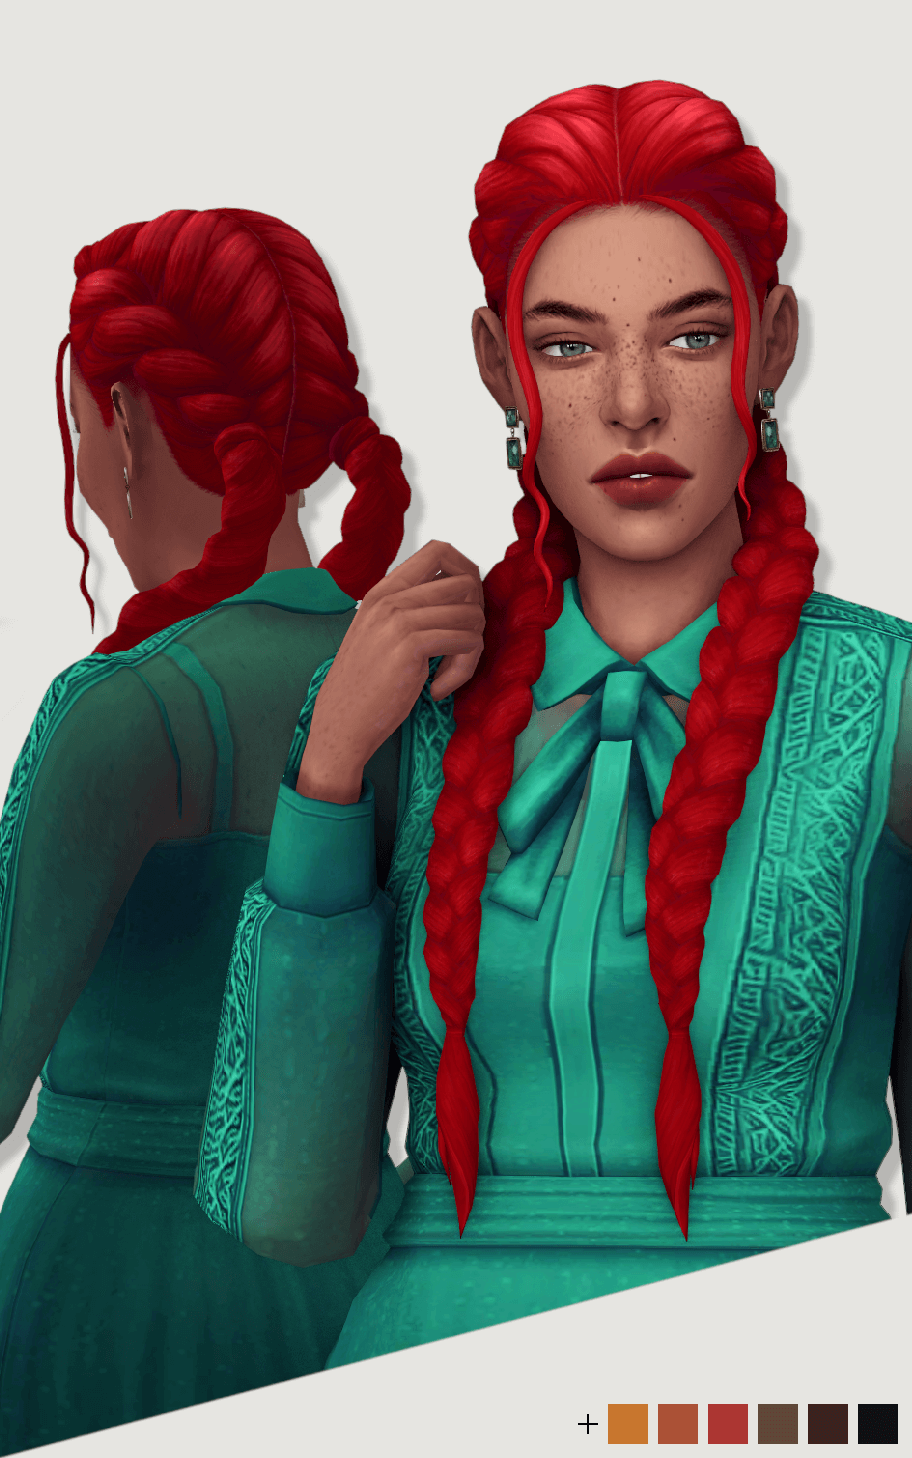 The Sims 4 Maxis Match Hair Collection Custom Content Showcase Vrogue